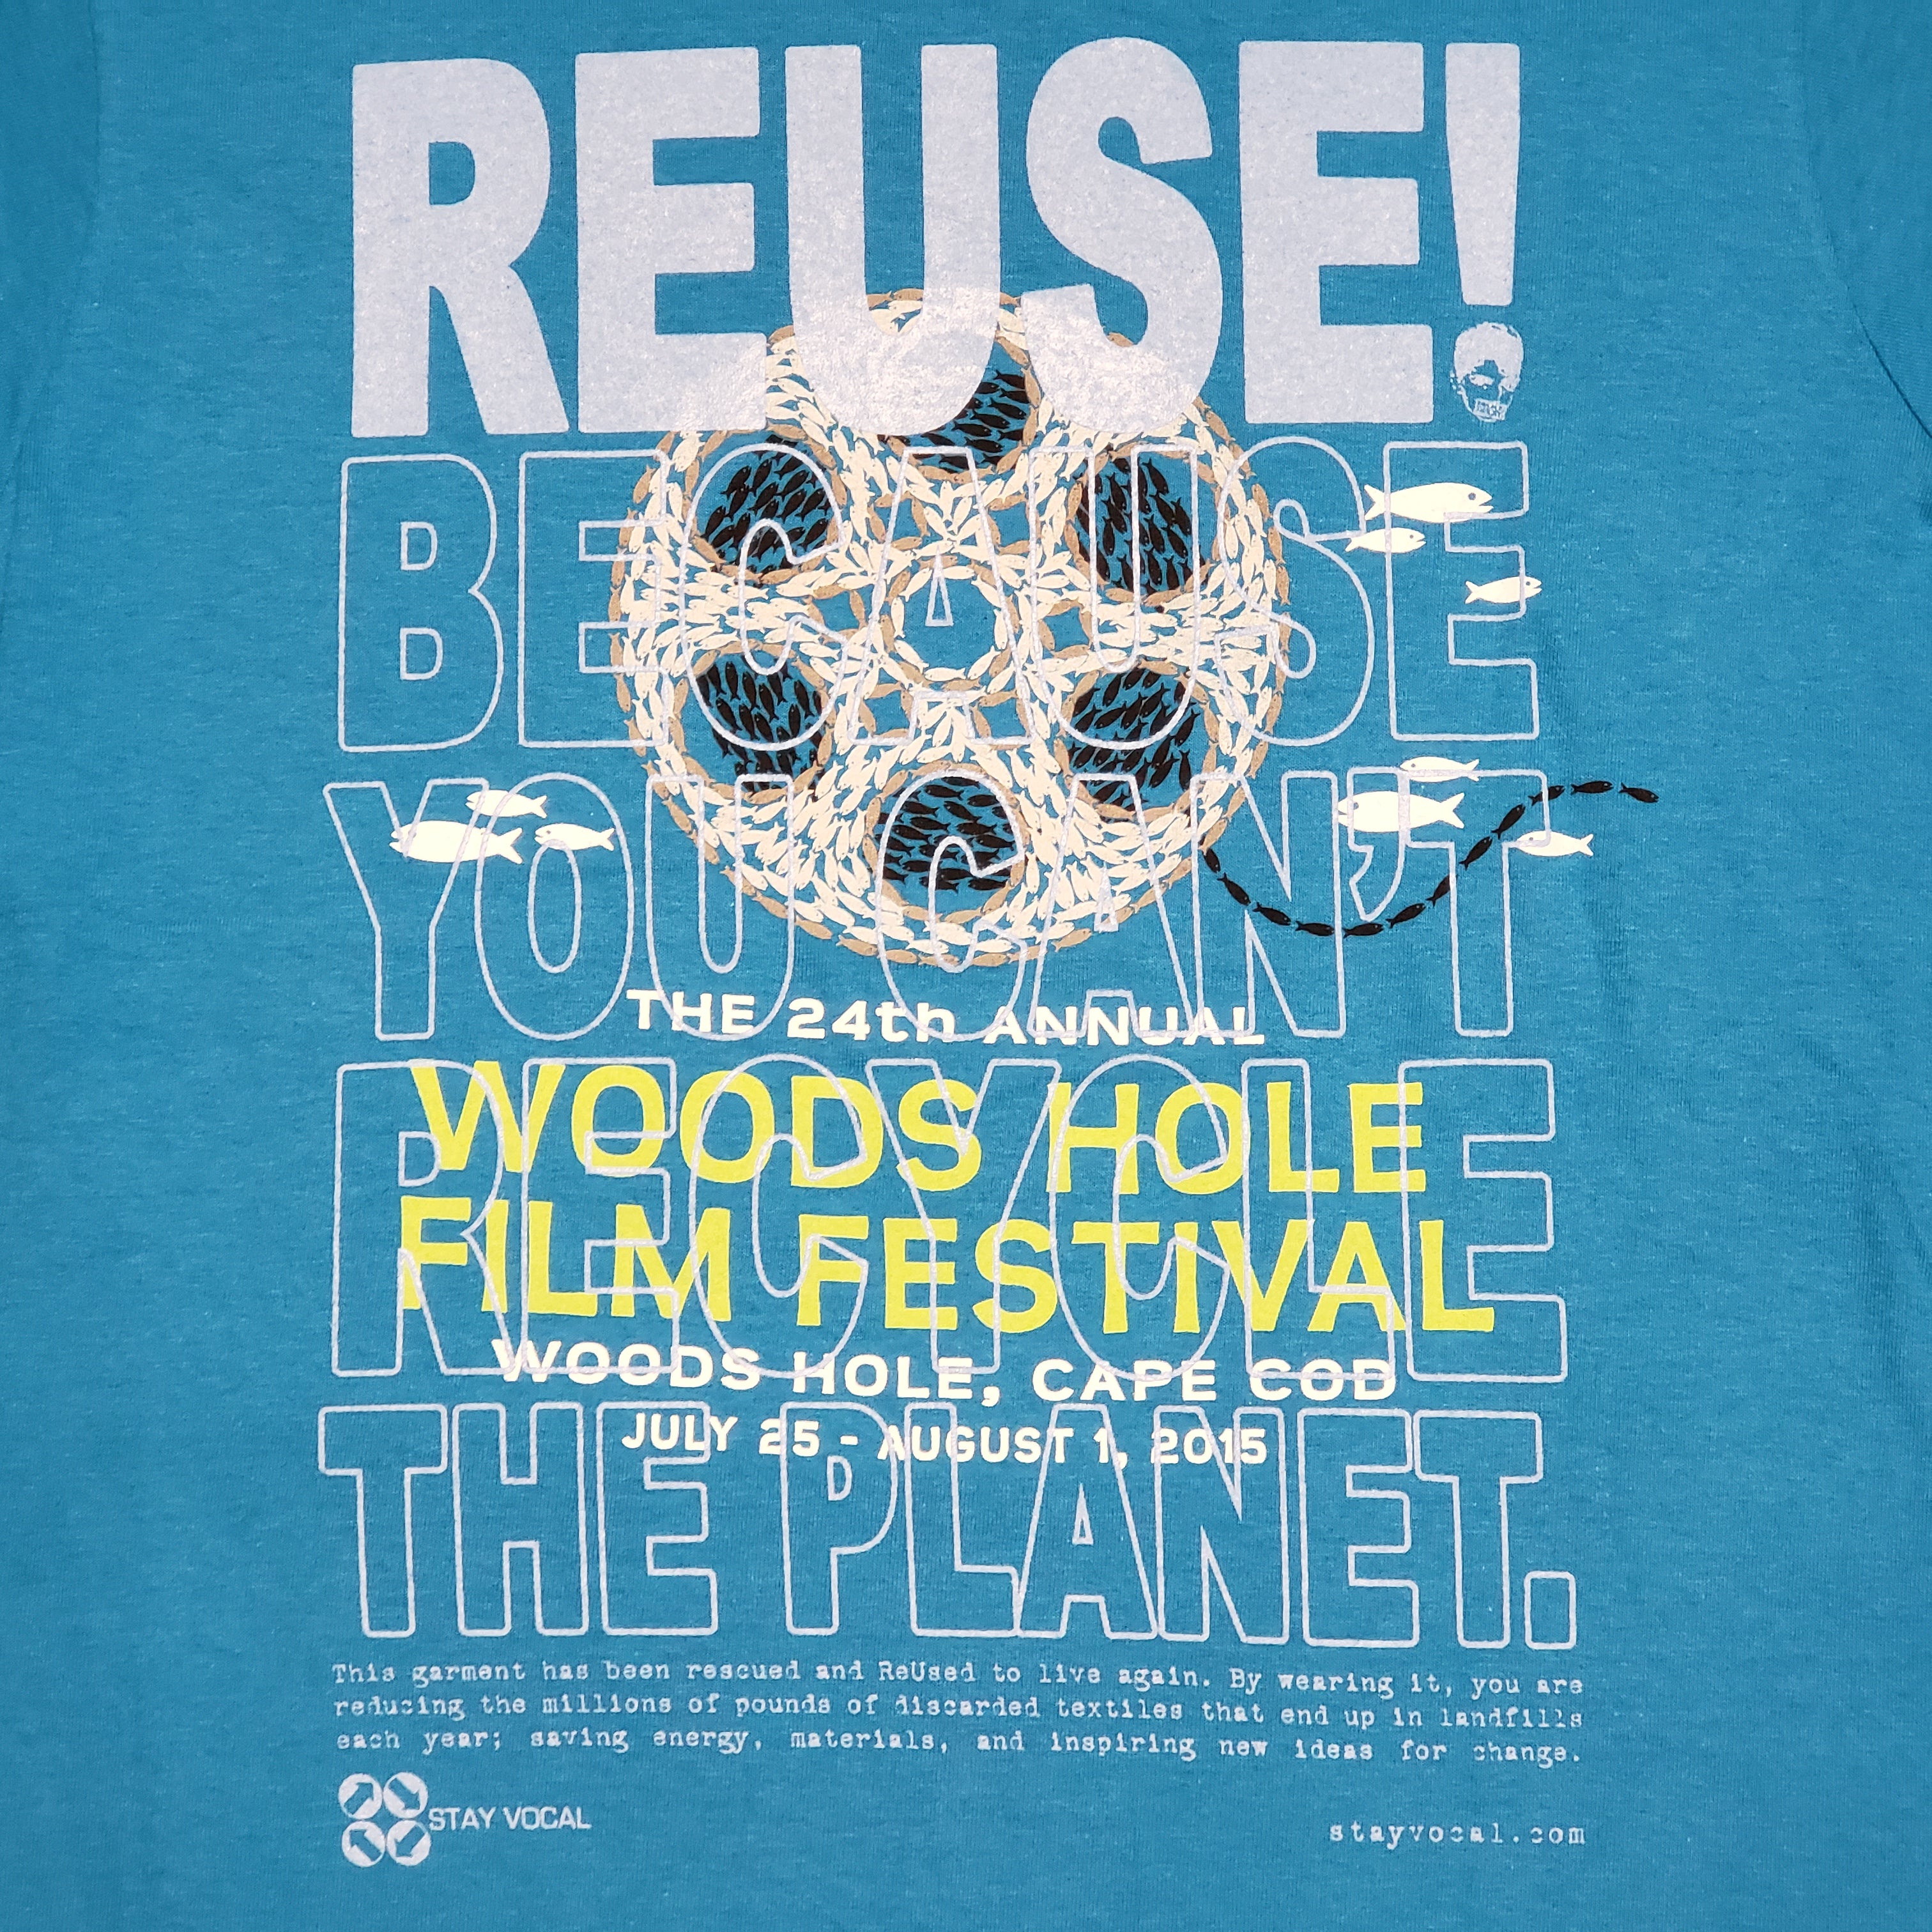 One of a Kind (Women's M) REUSE! at the 24th Woods Hole Film Festival T-Shirt